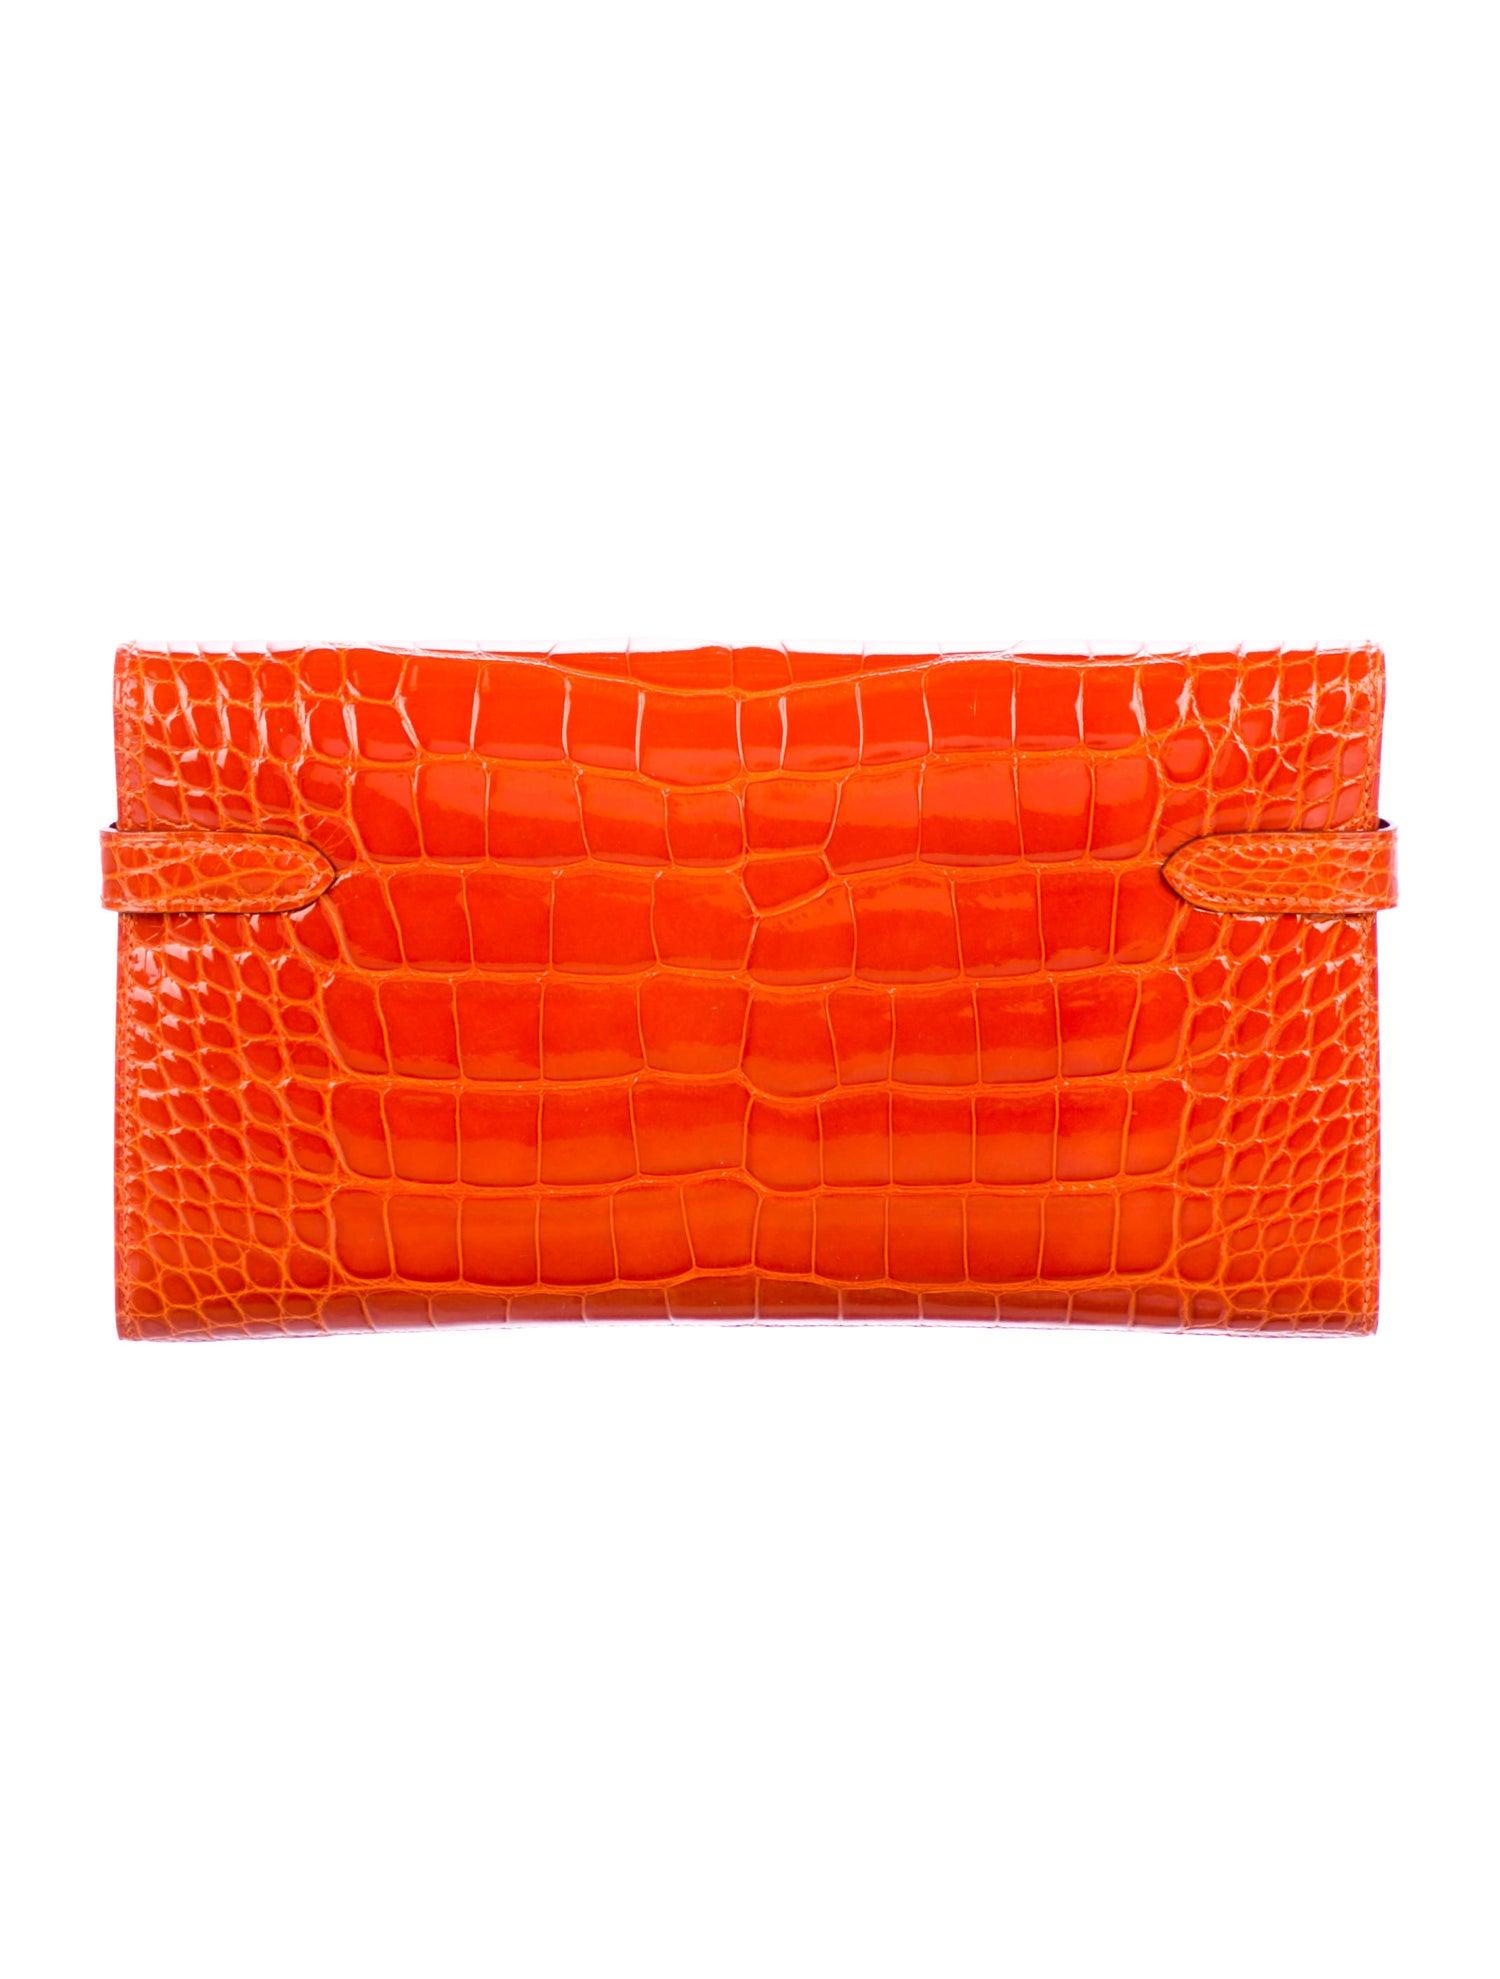 Hermes Orange Alligator Palladium  Evening Kelly Clutch Wallet Bag in Box

Alligator 
Palladium tone hardware
Turnlock closure
Leather lining
Date code present
Made in France
Features zip closure, bill compartment and 12 card slots 
Measures 7.75